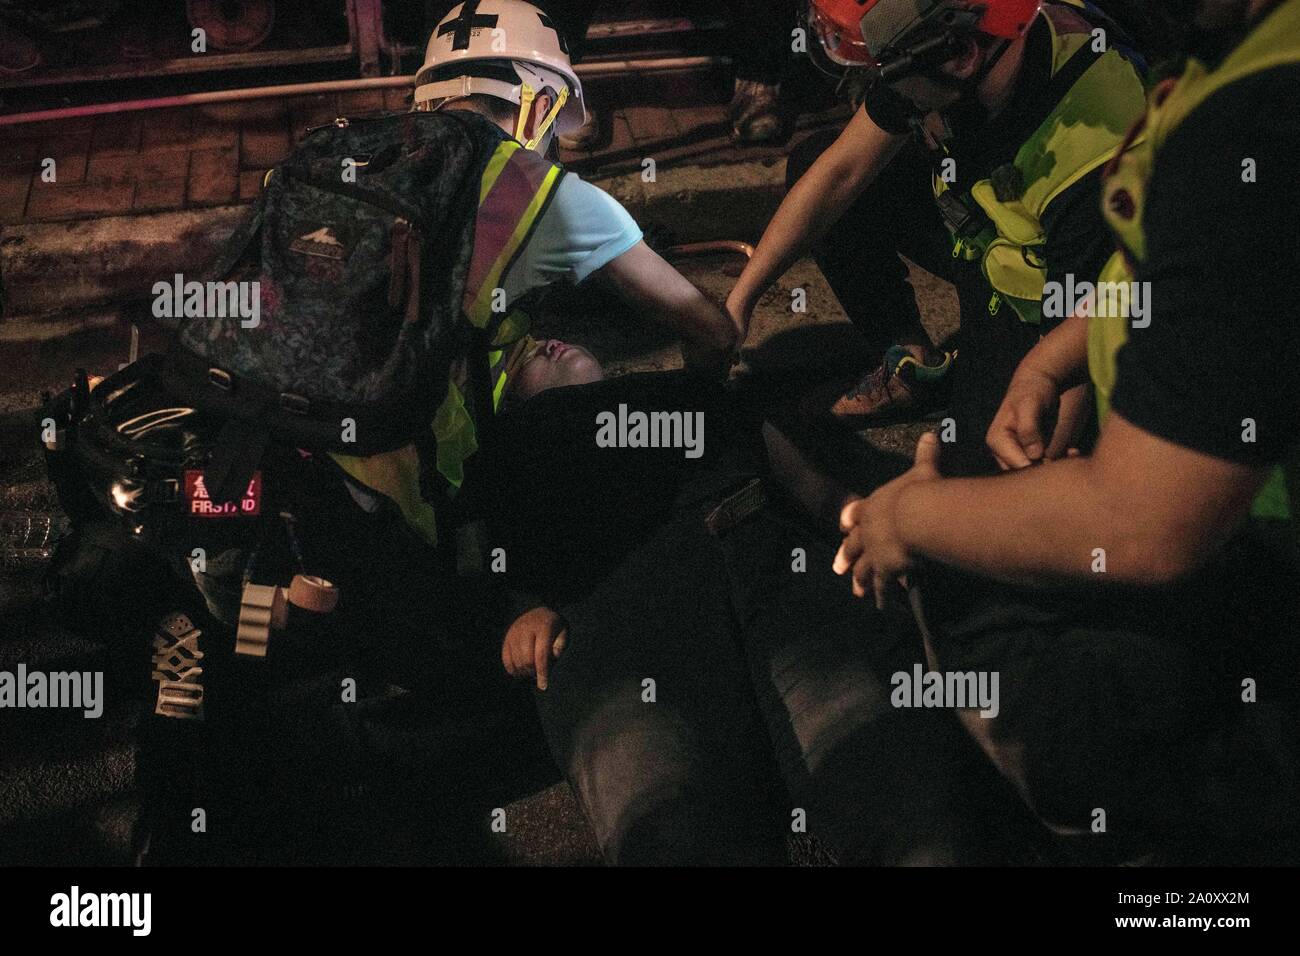 Paramedics help a fainted demonstrator during the protests.Protesters continue to demonstrate across Hong Kong for the 15th consecutive week. Demonstration were held inside a shopping mall in Yuen Long against the government. Stock Photo